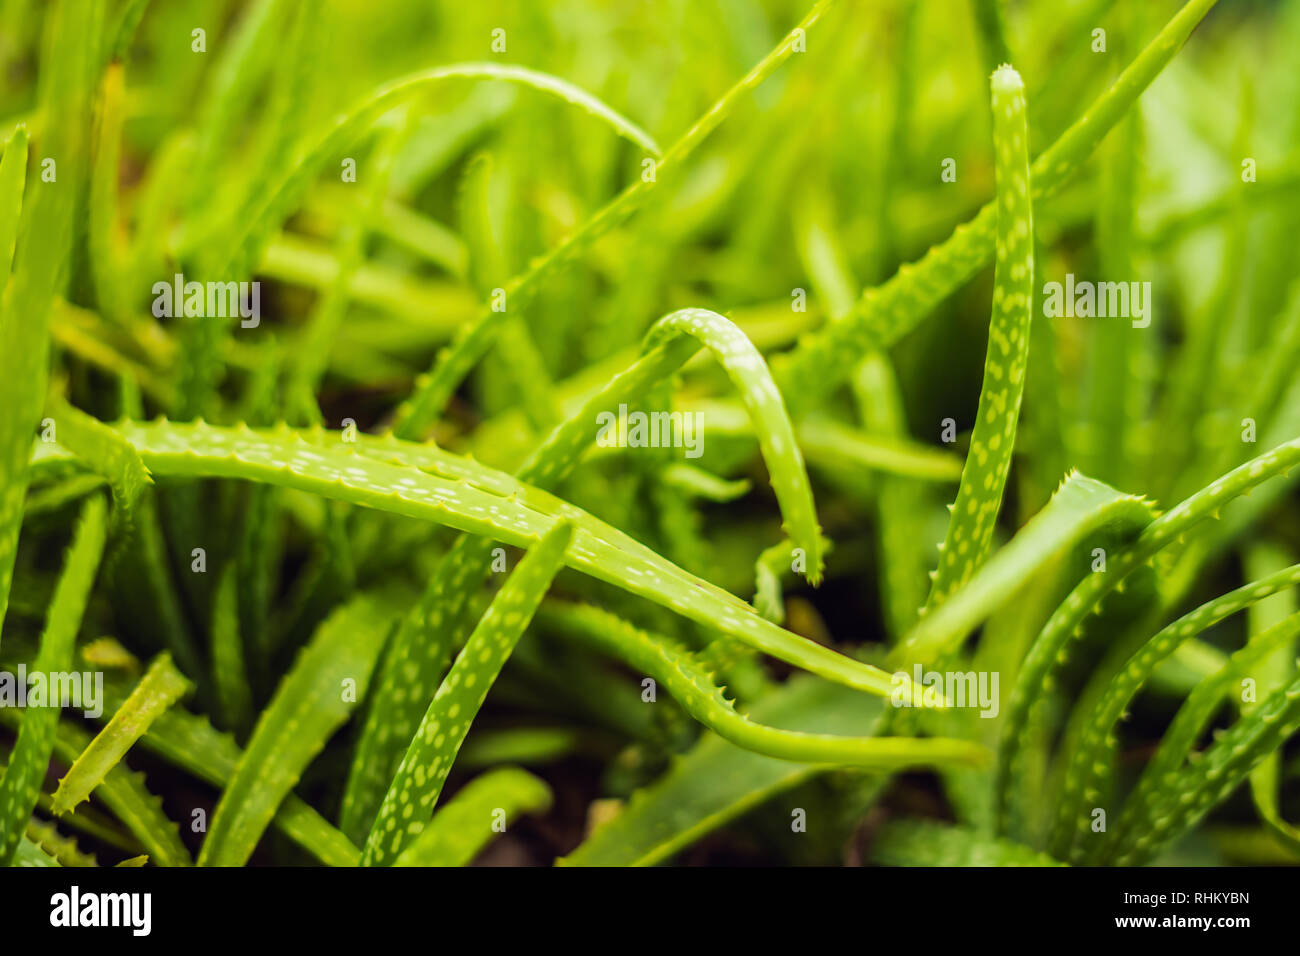 Background of gently green aloe leaf texture Stock Photo